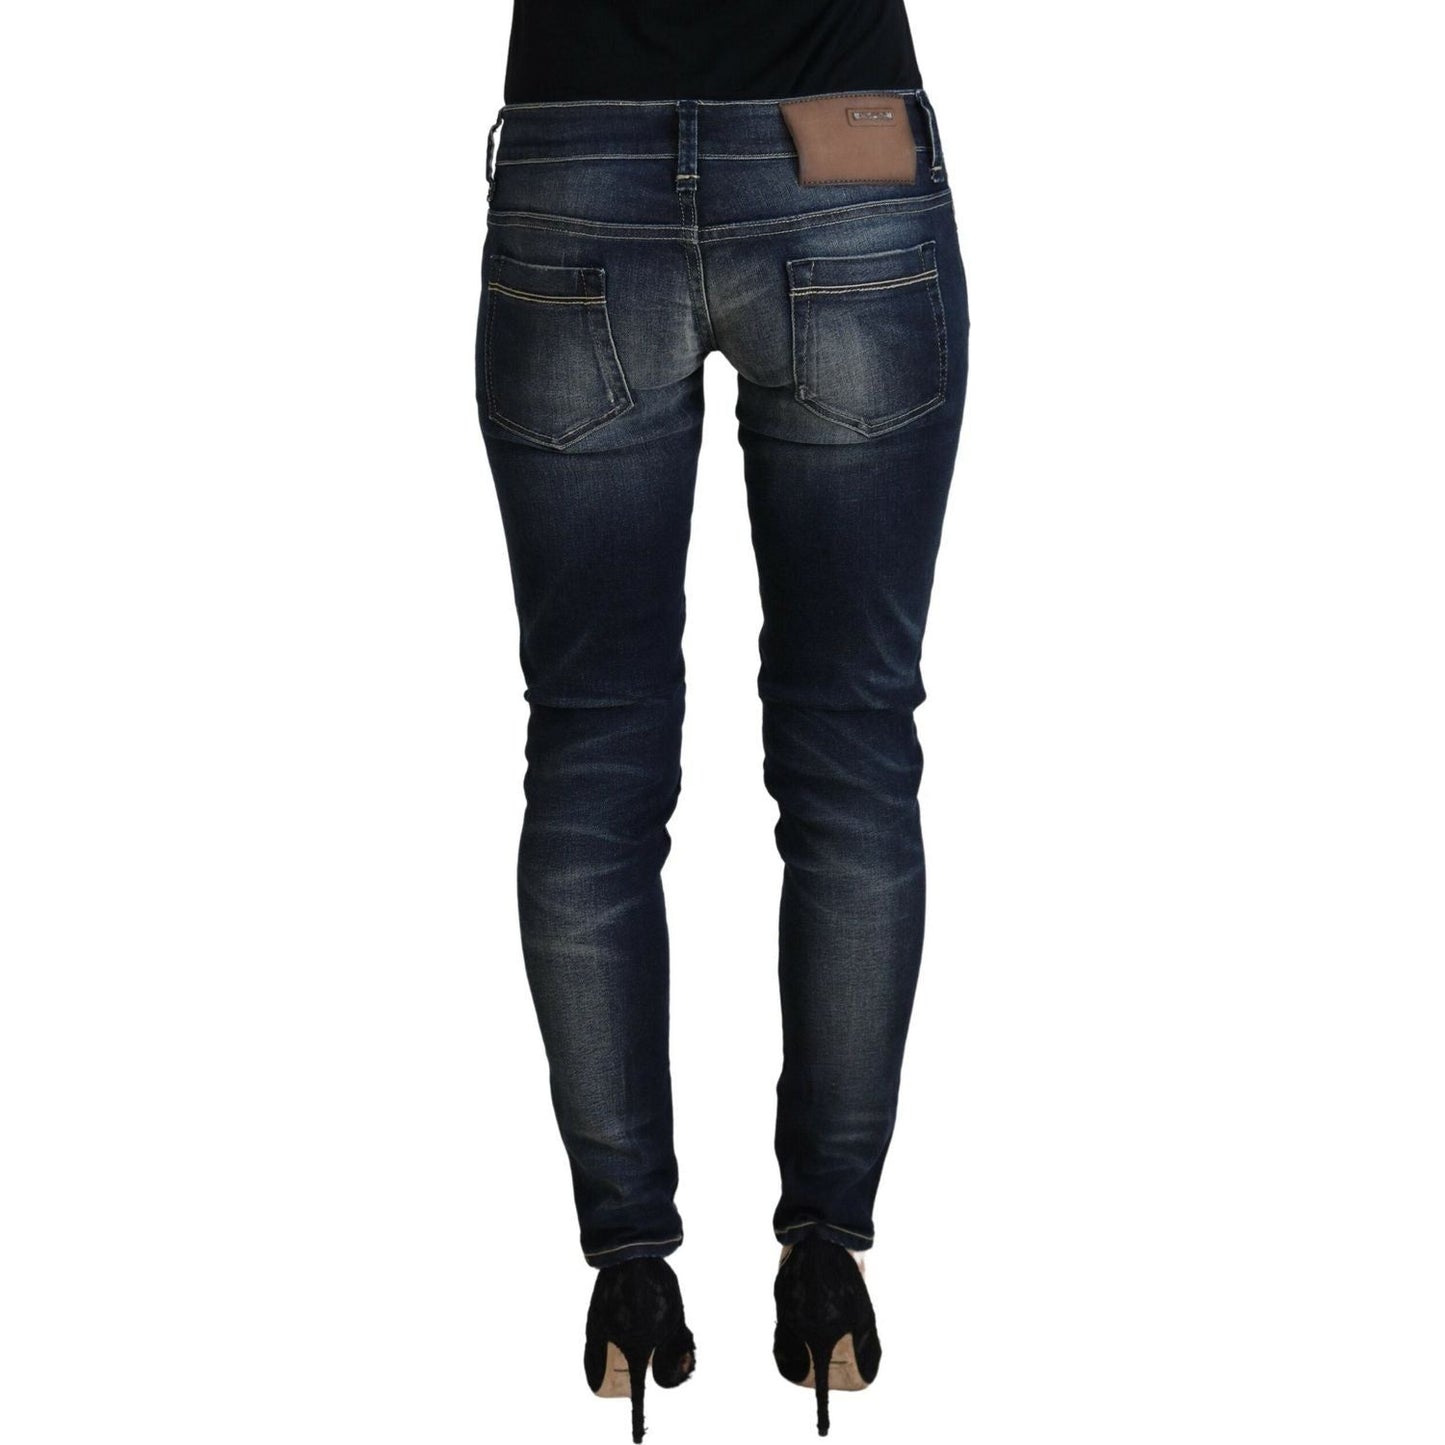 Acht Chic Blue Washed Skinny Low Waist Jeans blue-washed-cotton-slim-fit-women-denim-jeans